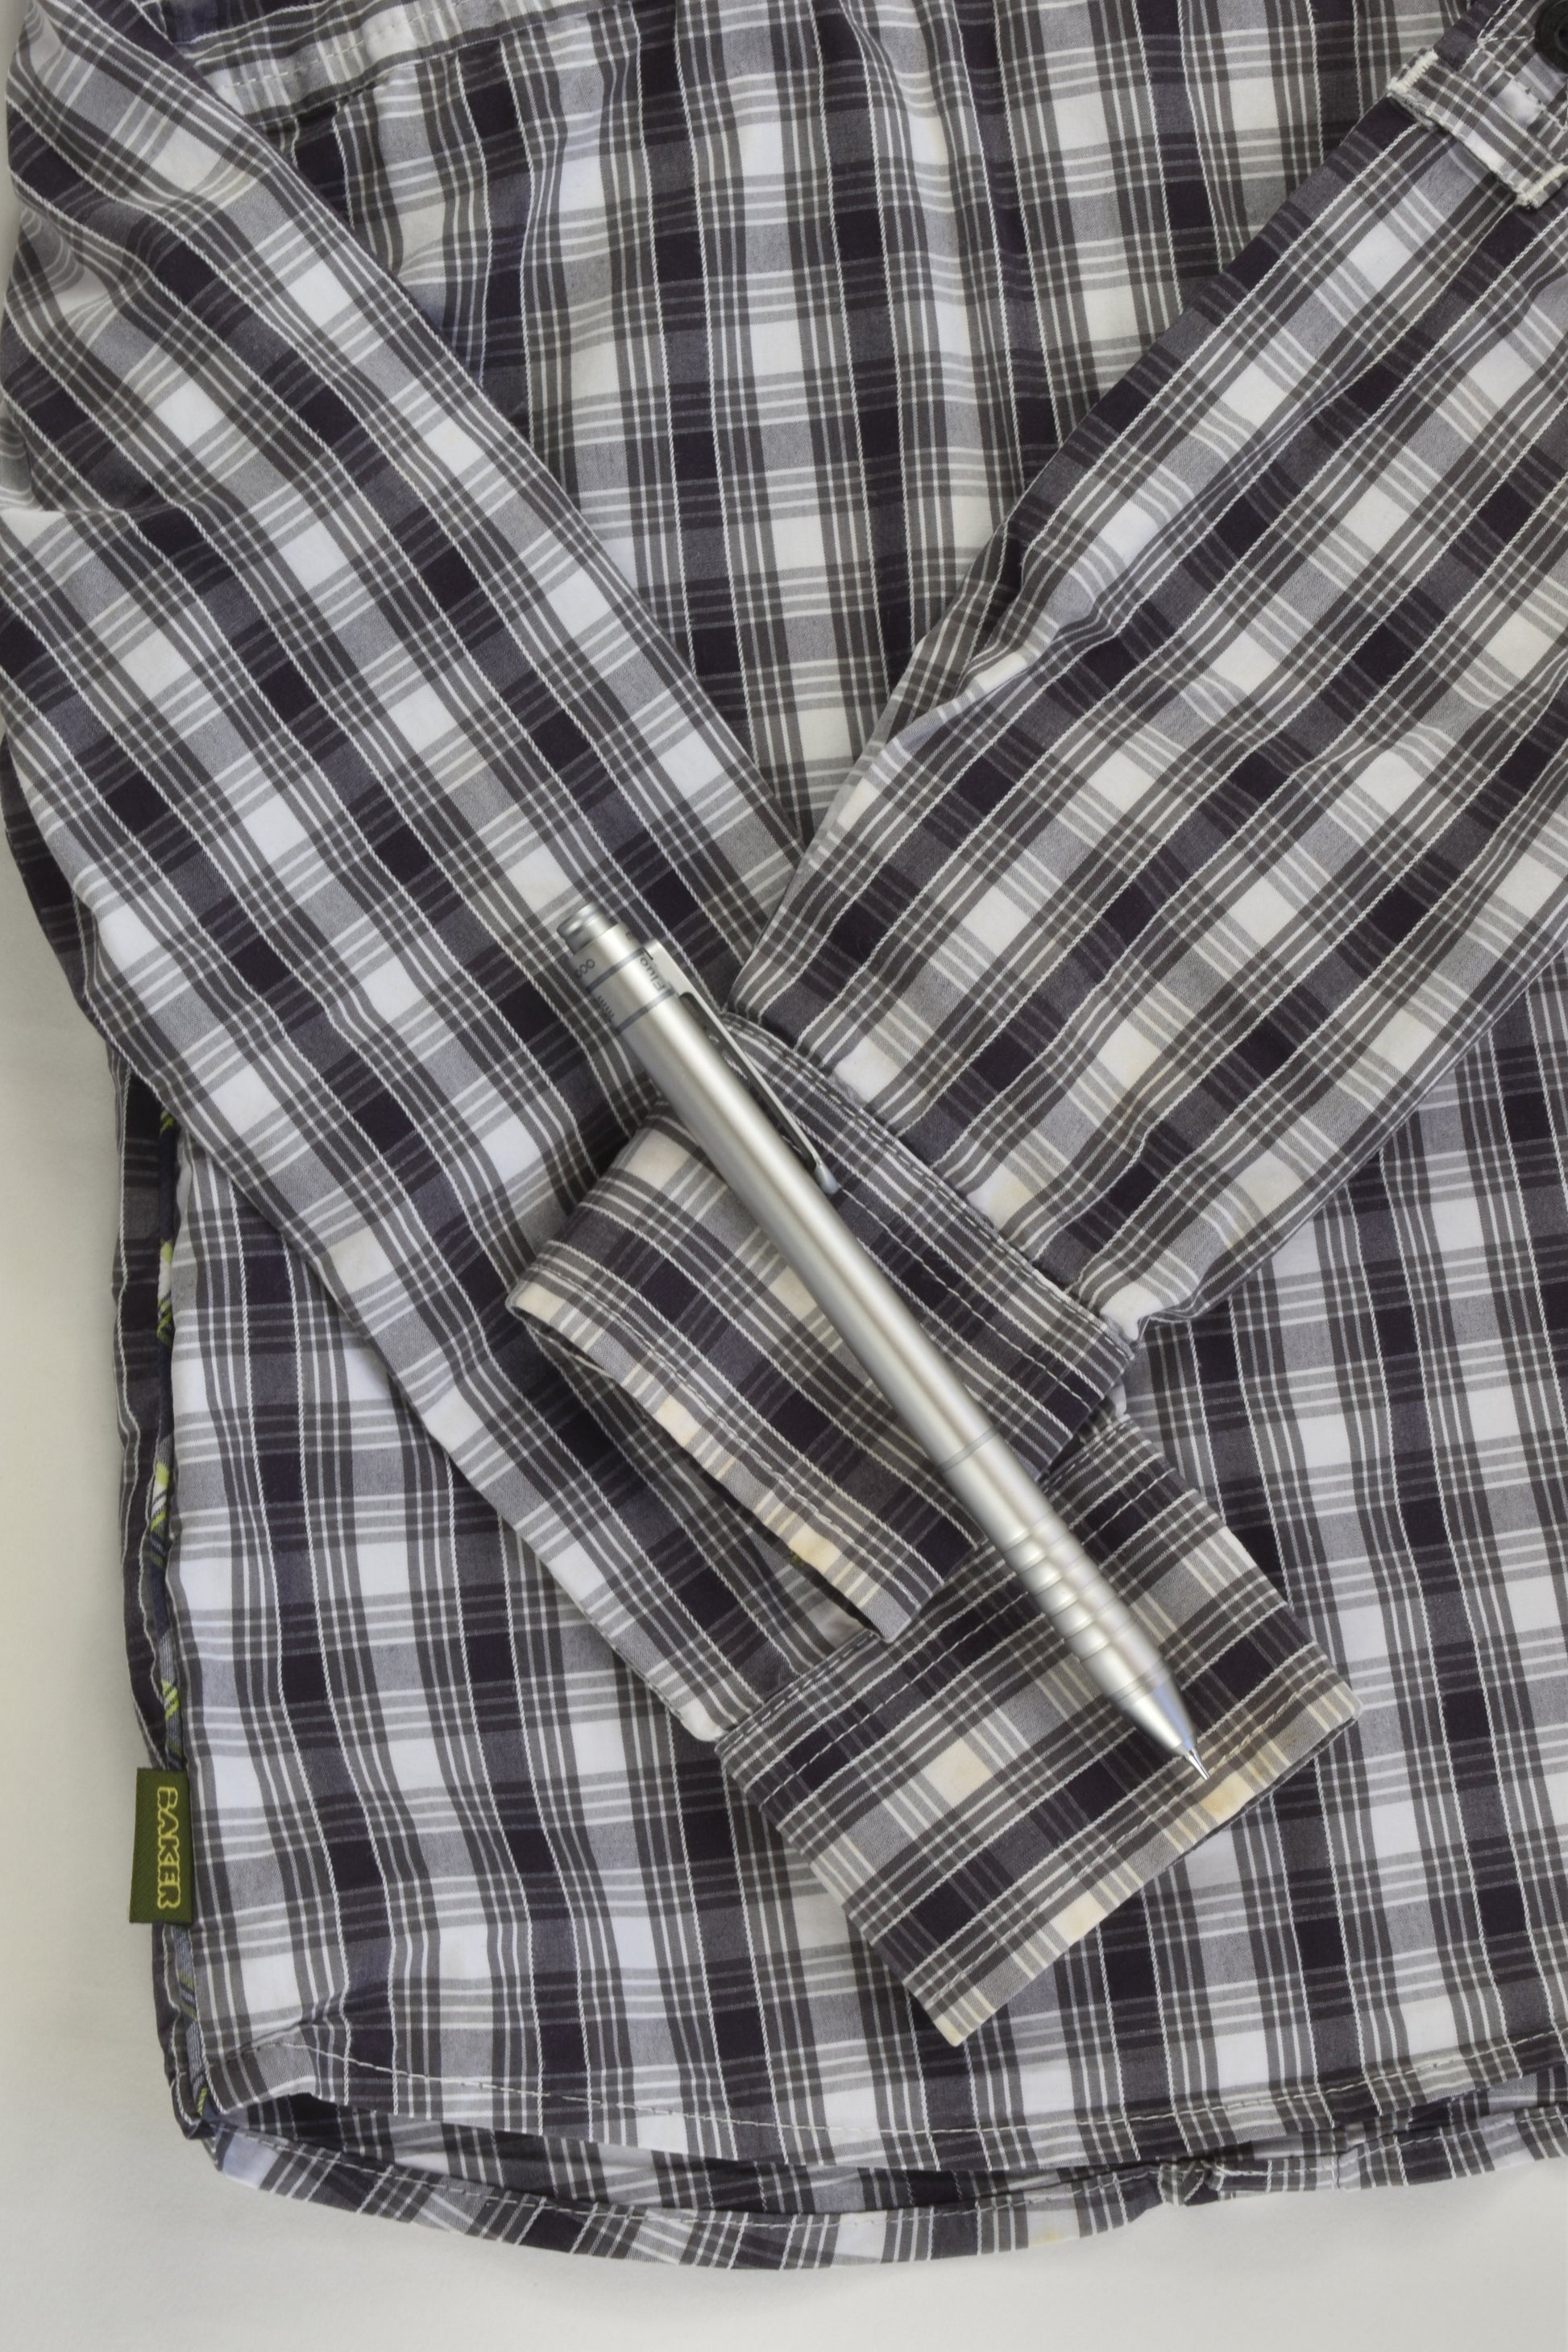 Baker Boy by Ted Baker Size 2-3 Checked Shirt